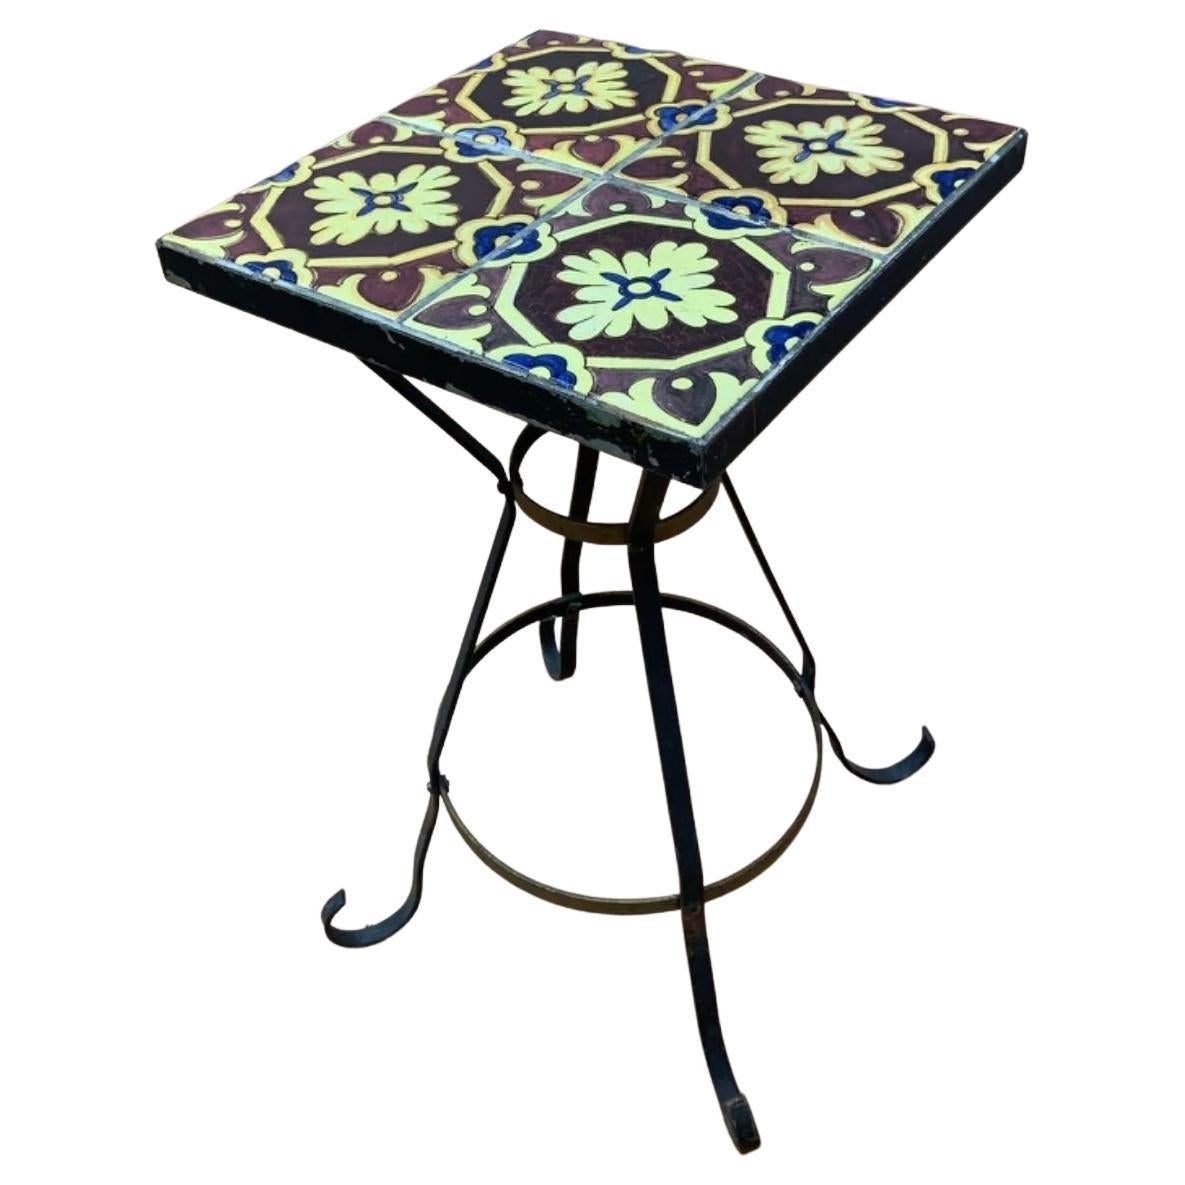 Vintage Wrought Iron Tile Top Accent Table For Sale